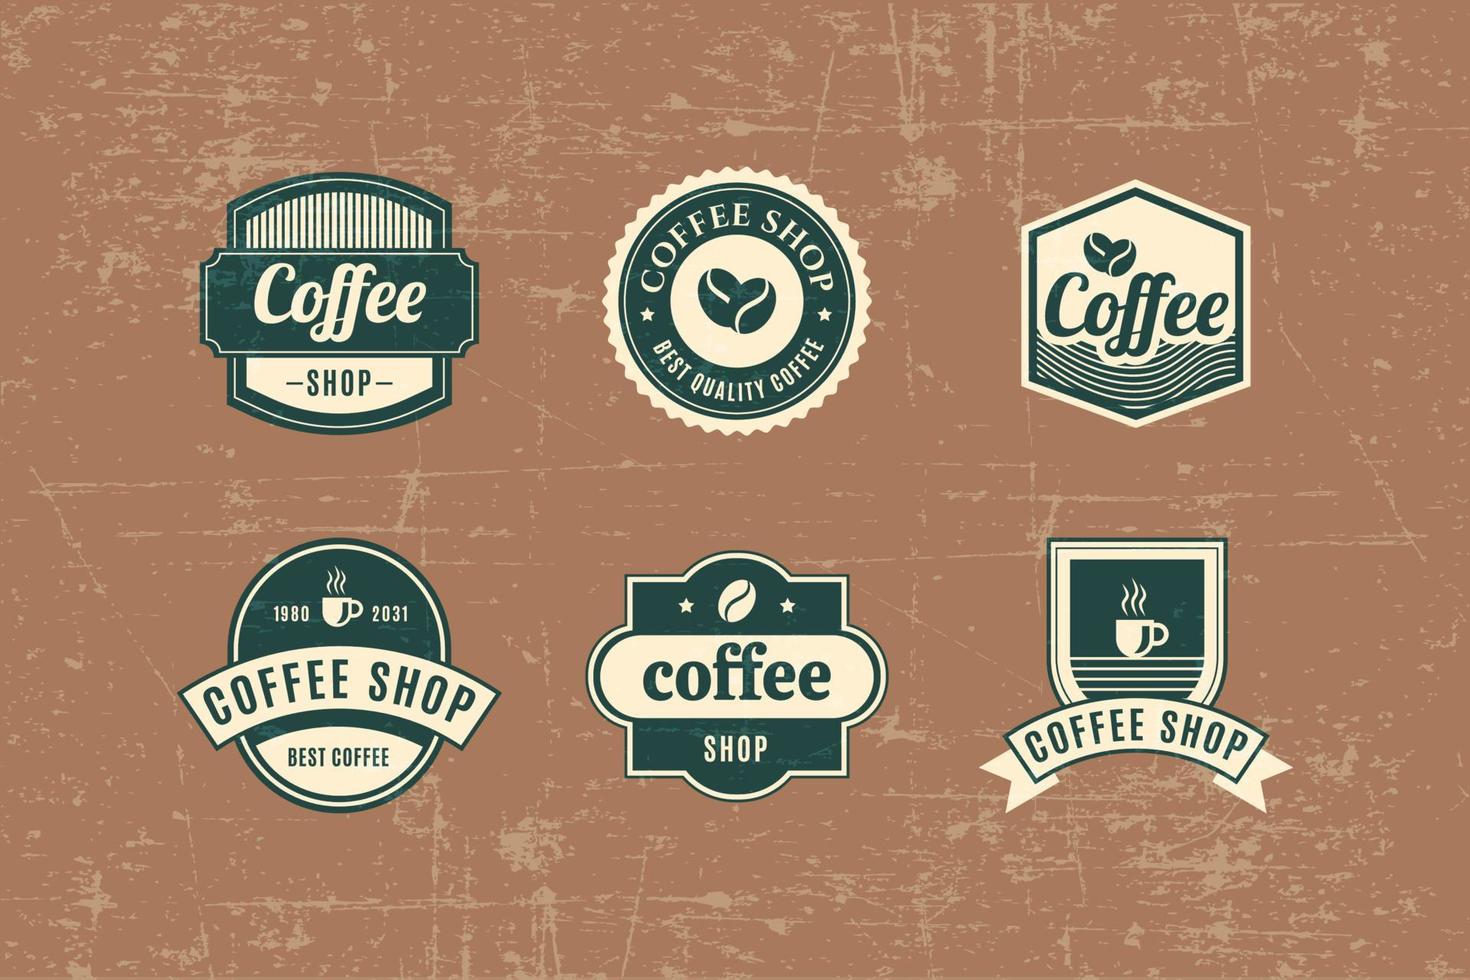 Vintage Coffee Place Logo with Green and Beige Color vector